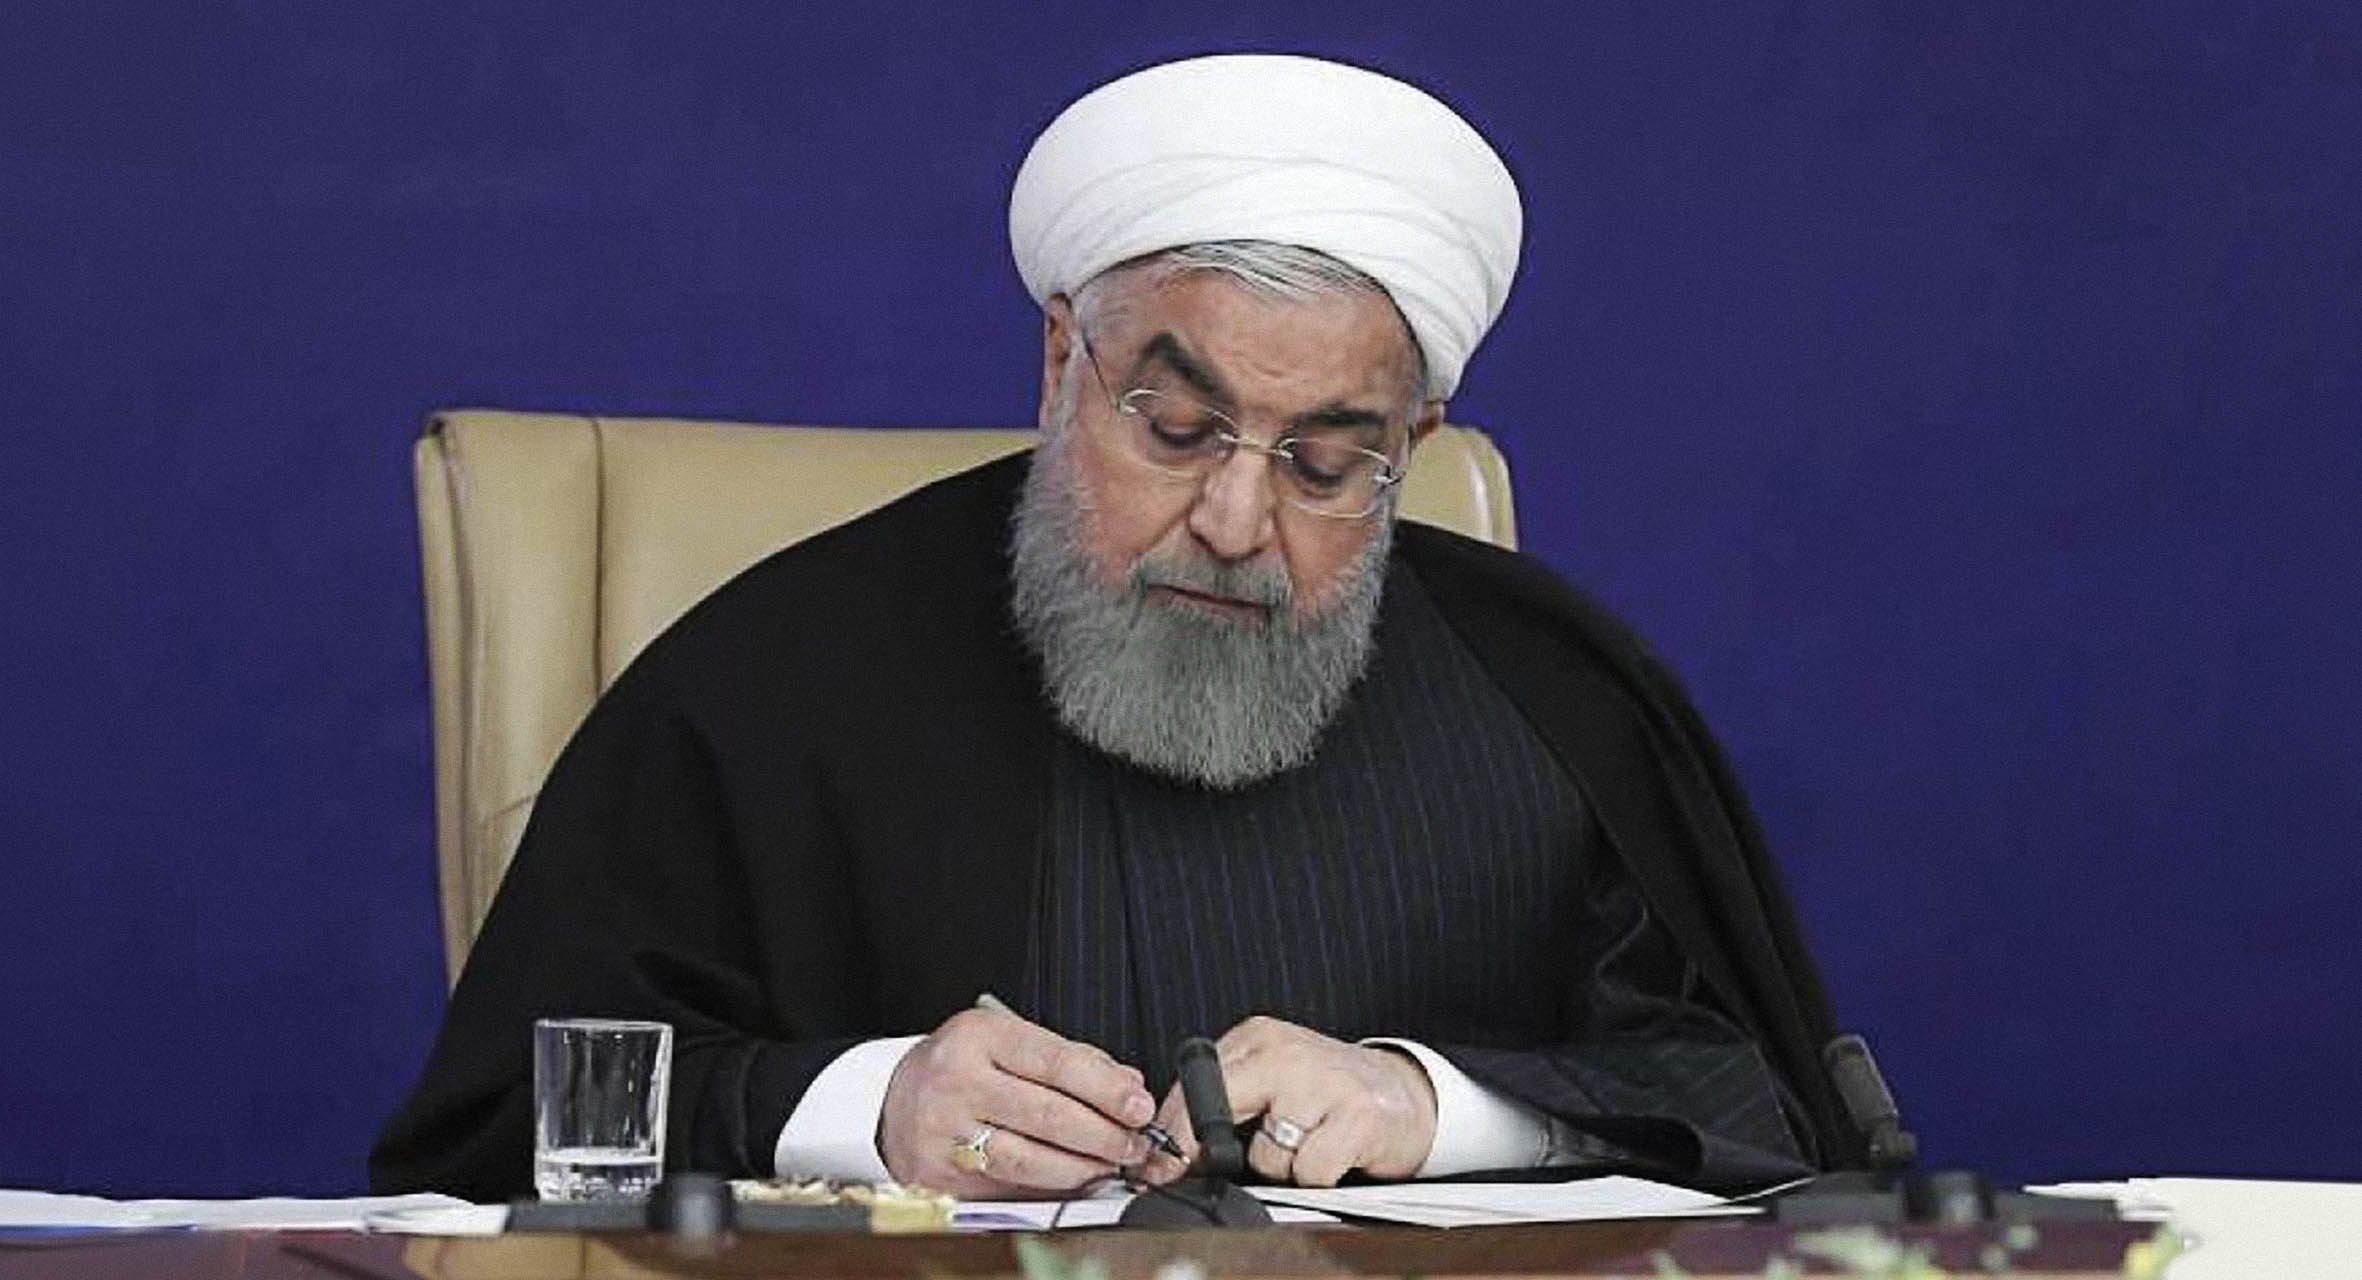 ‘Are Uighurs even real Muslims?’ asks frustrated Rouhani as he signs strategic deals with China image